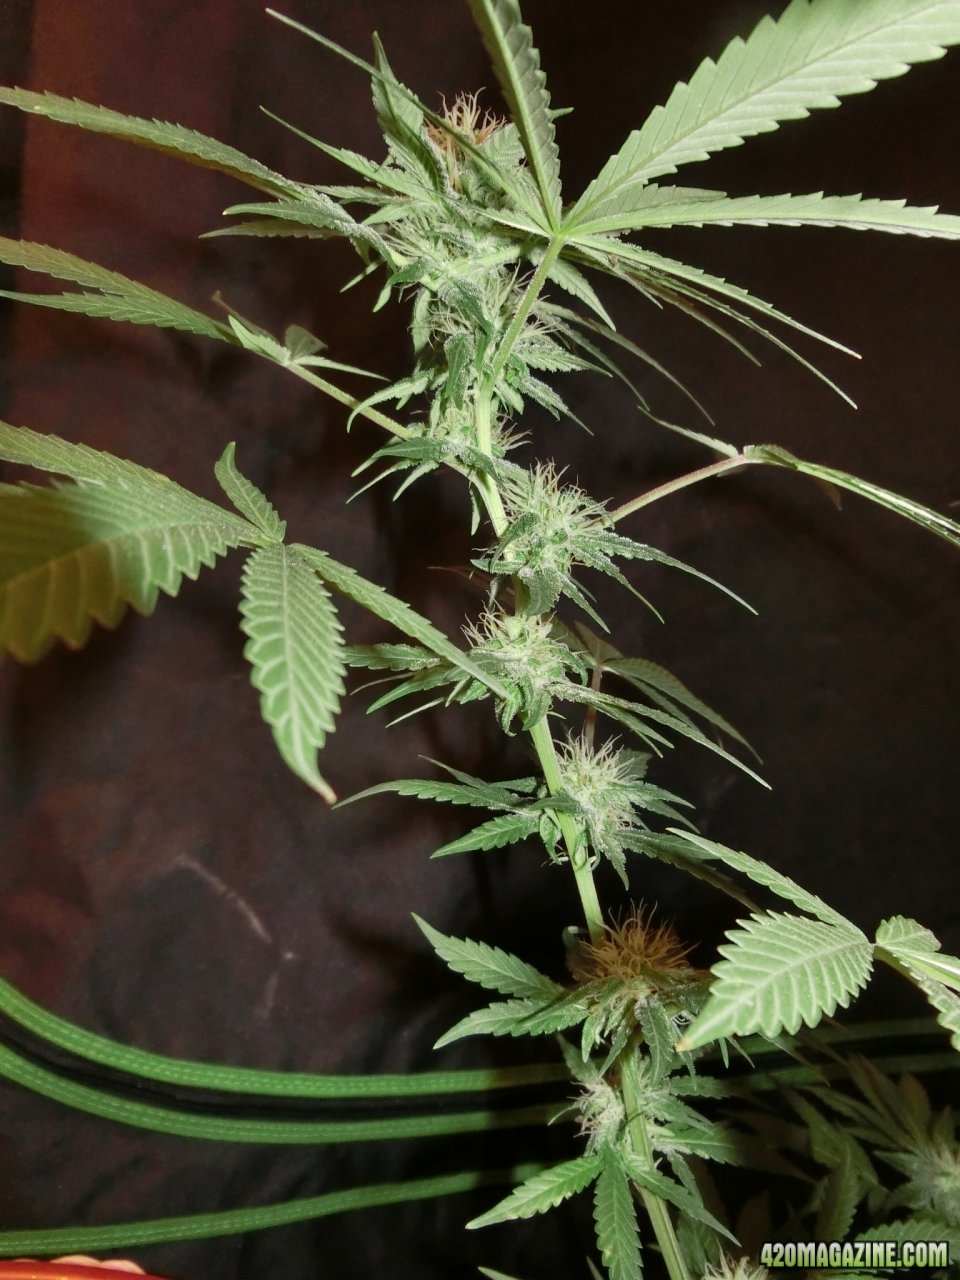 Day 84 Maui Waui Flower Day 36 - Buds are small but stacking. Good spacing.